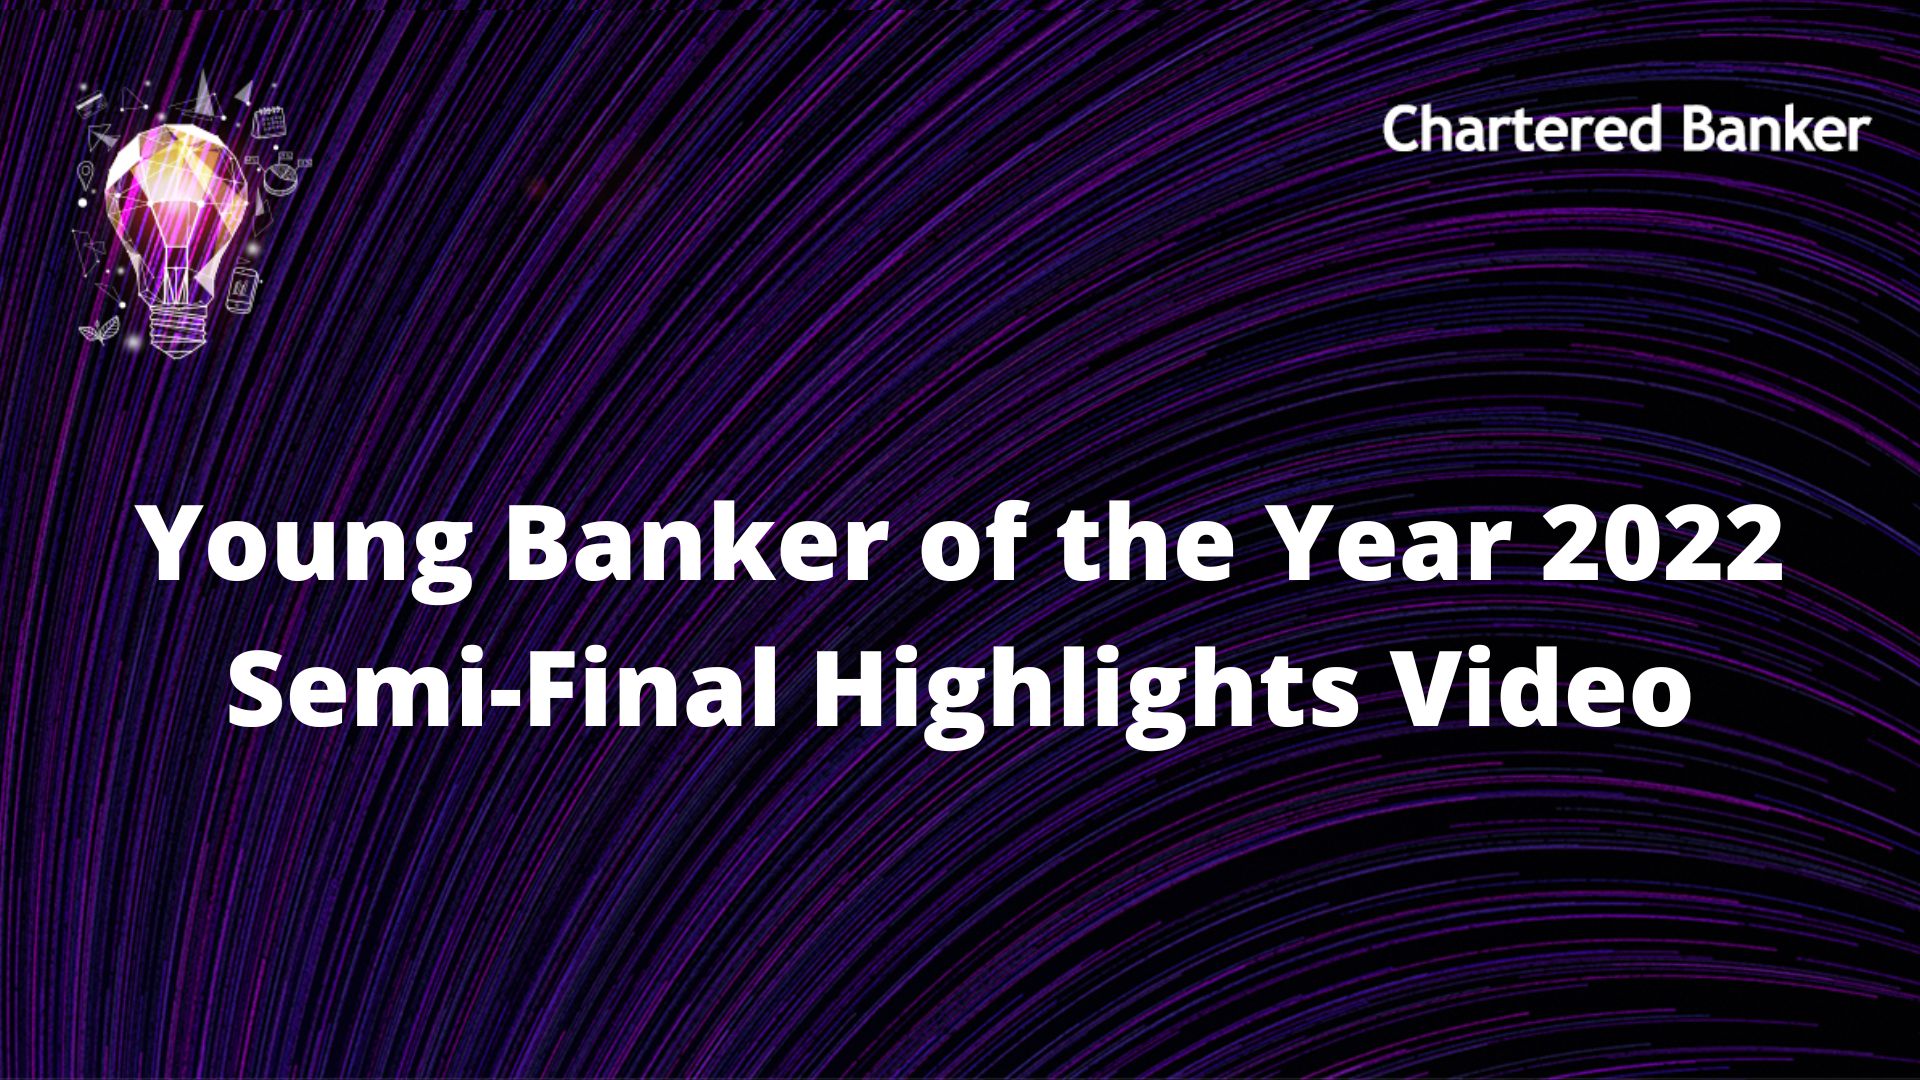 Young Banker of the Year 2022 - Semi-Final Highlights 